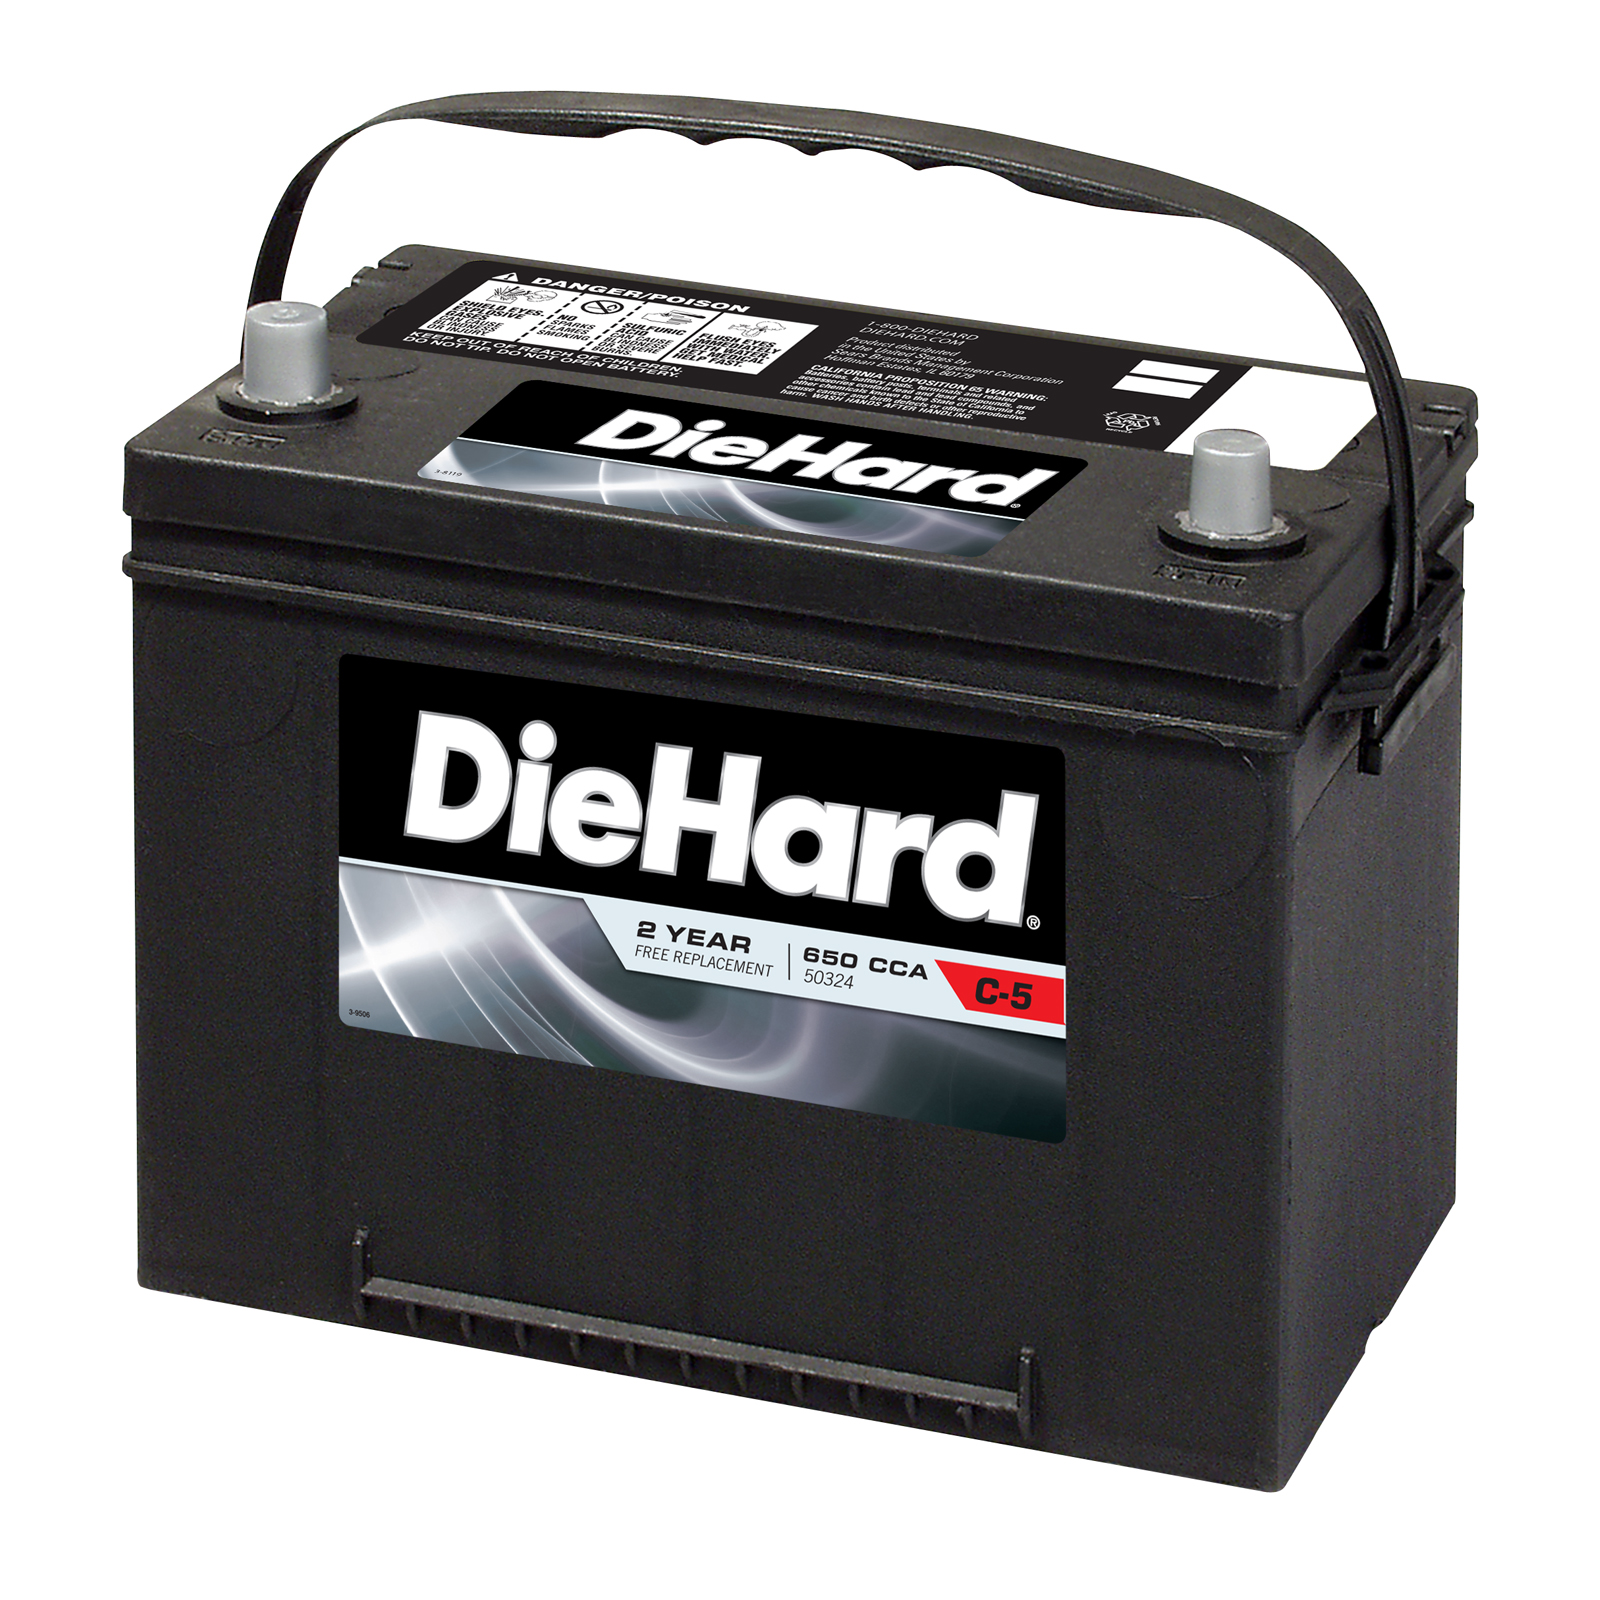 DieHard Automotive Battery - Group Size EP-24 (Price with Exchange)